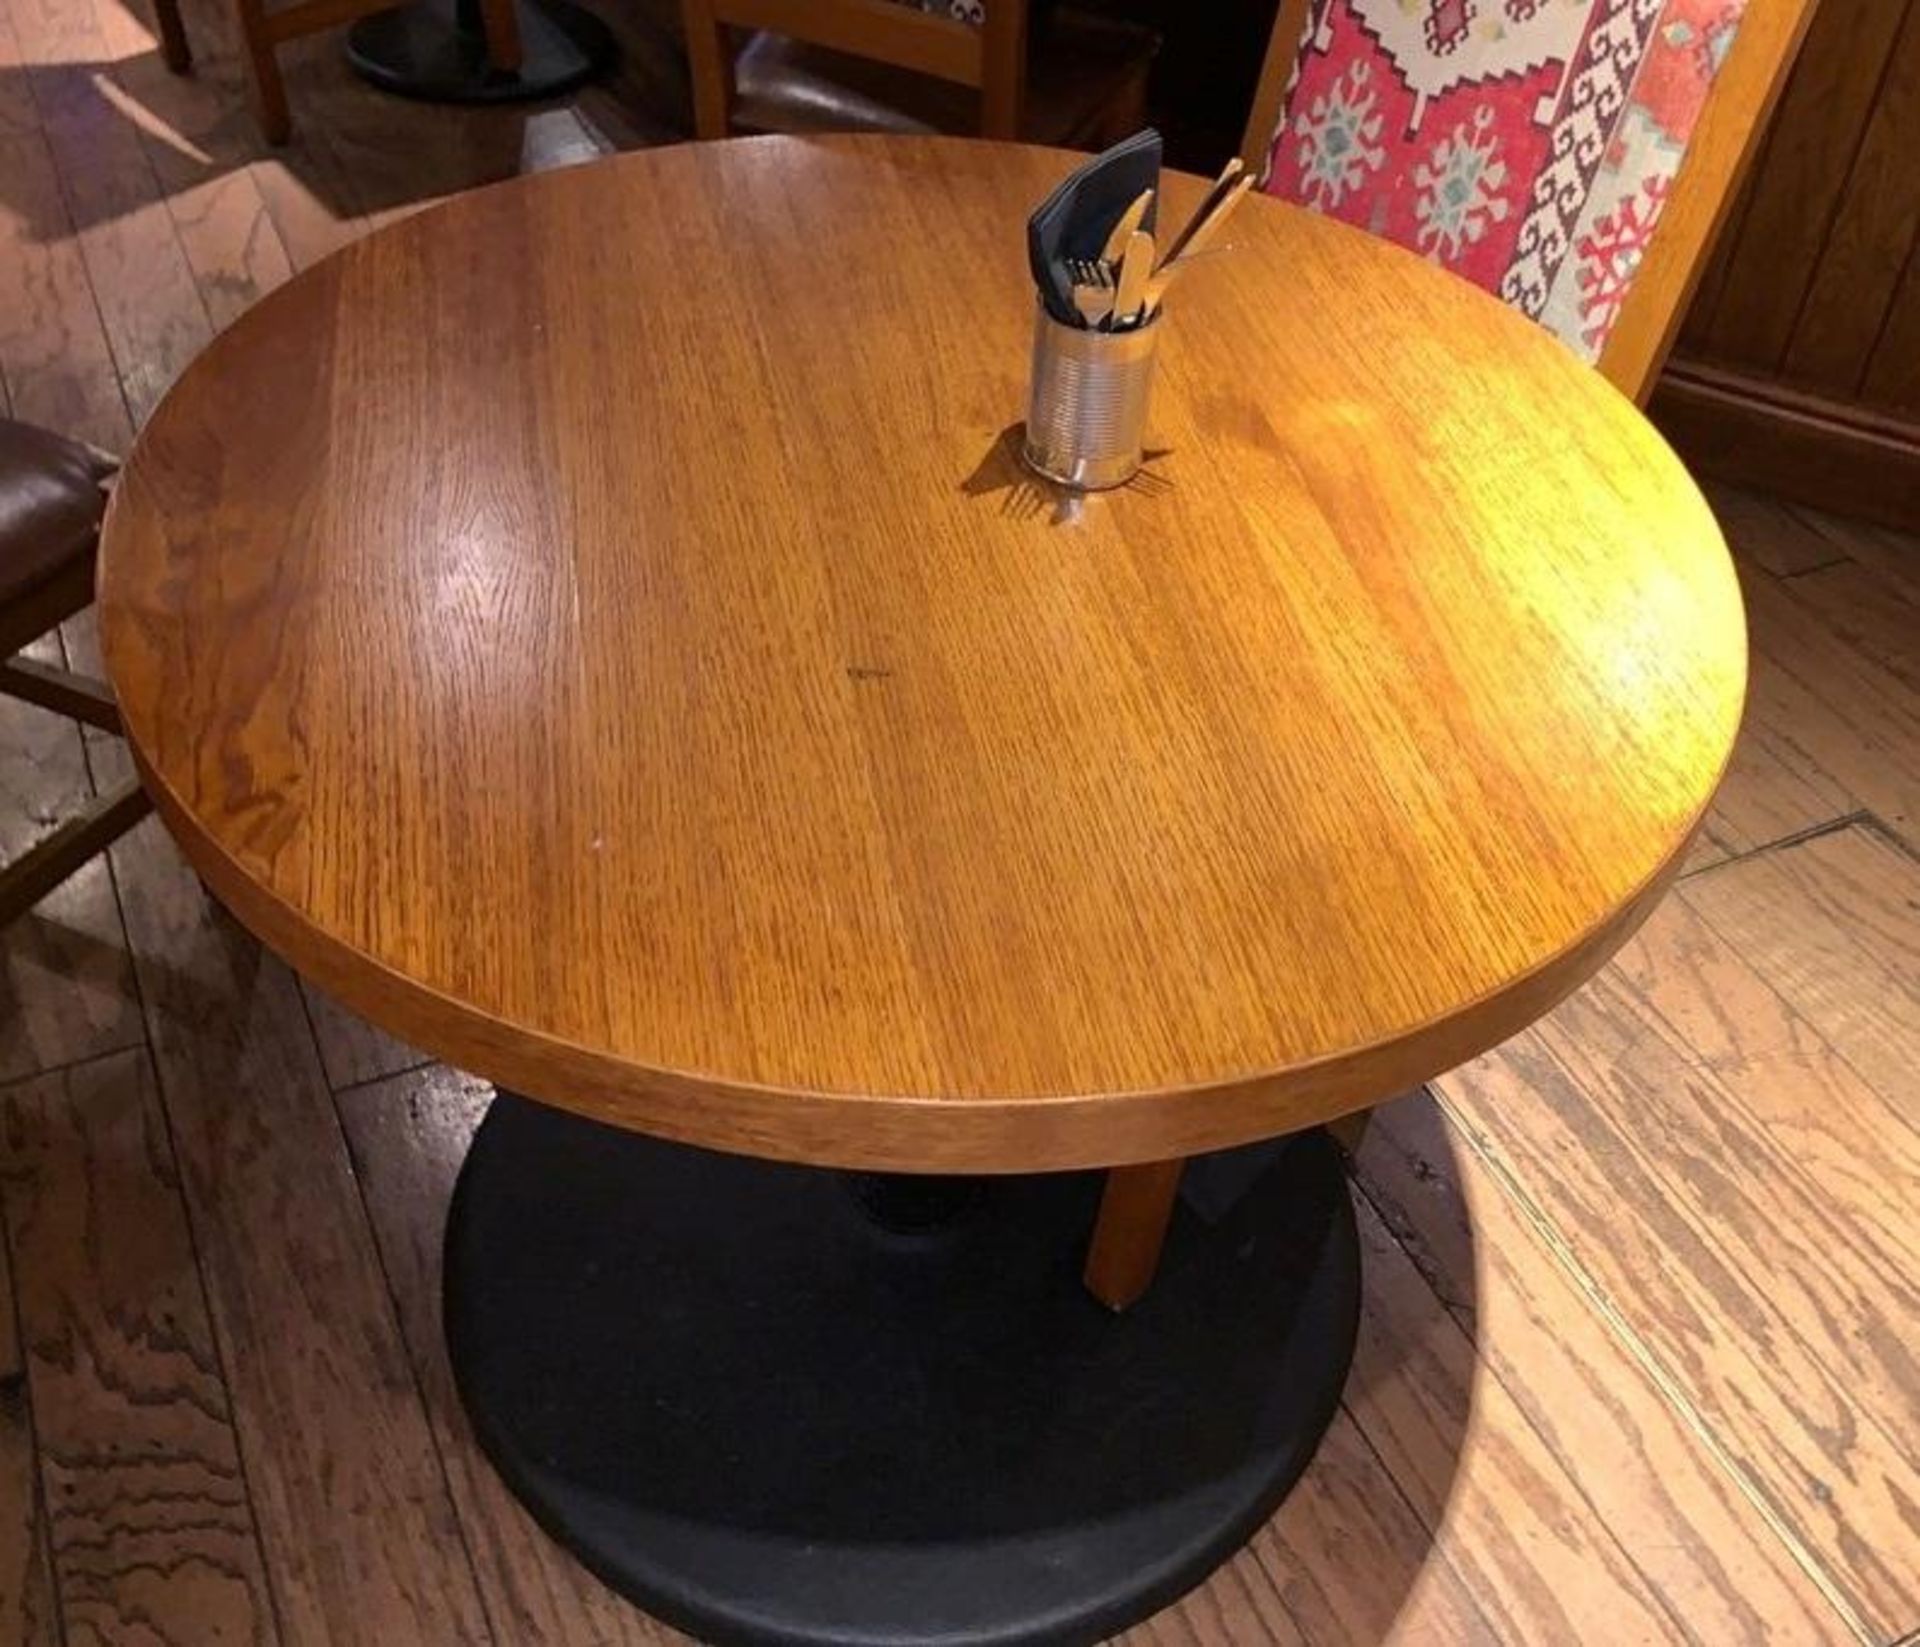 1 x Medium Circular Wood And Metal Table - Dimensions: W95cm H75cm - CL339 - From a Popular Mexican